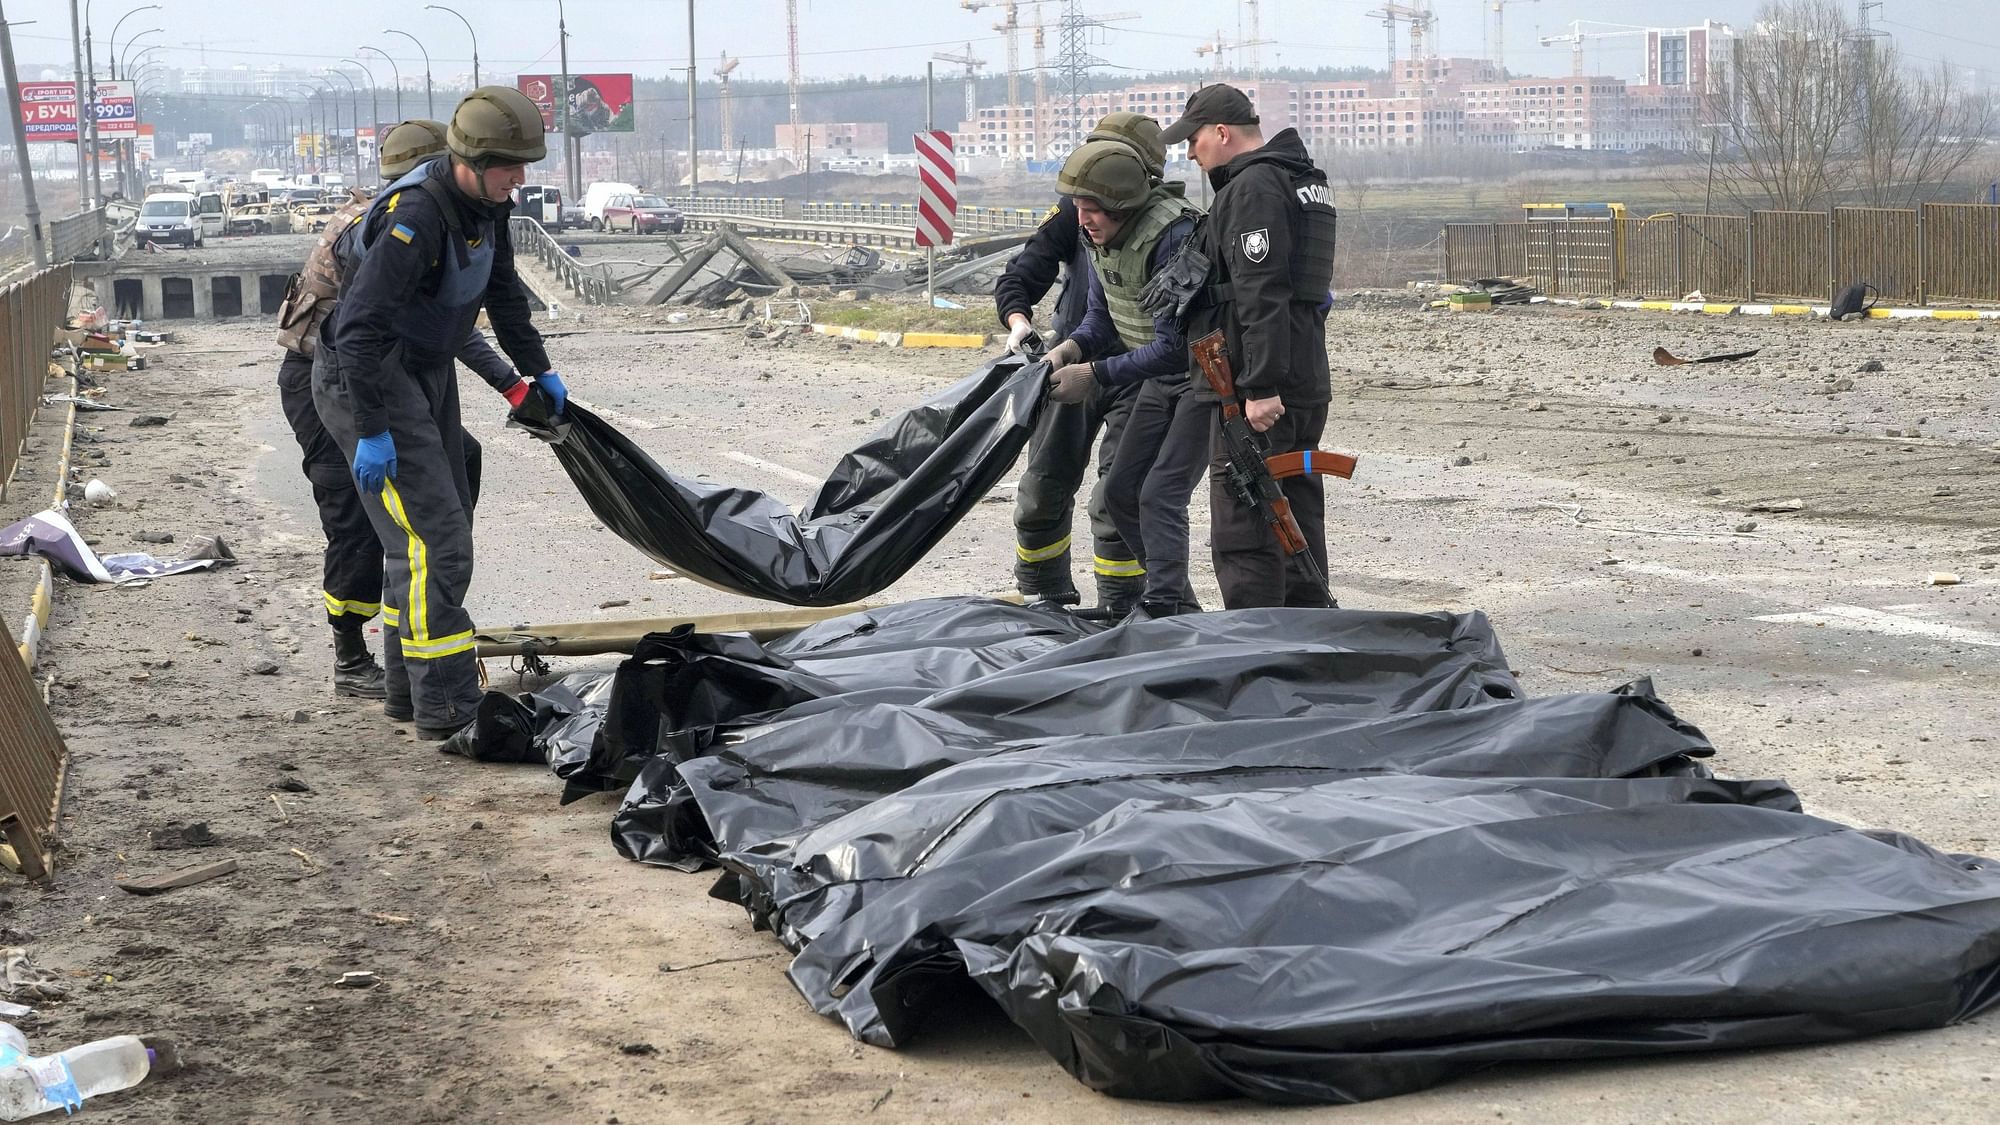 <div class="paragraphs"><p>Image used for representation only. Ukrainian soldiers collect bodies of civilians killed by the Russian forces at the destroyed bridge in Irpin close to Kyiv, Ukraine.</p></div>